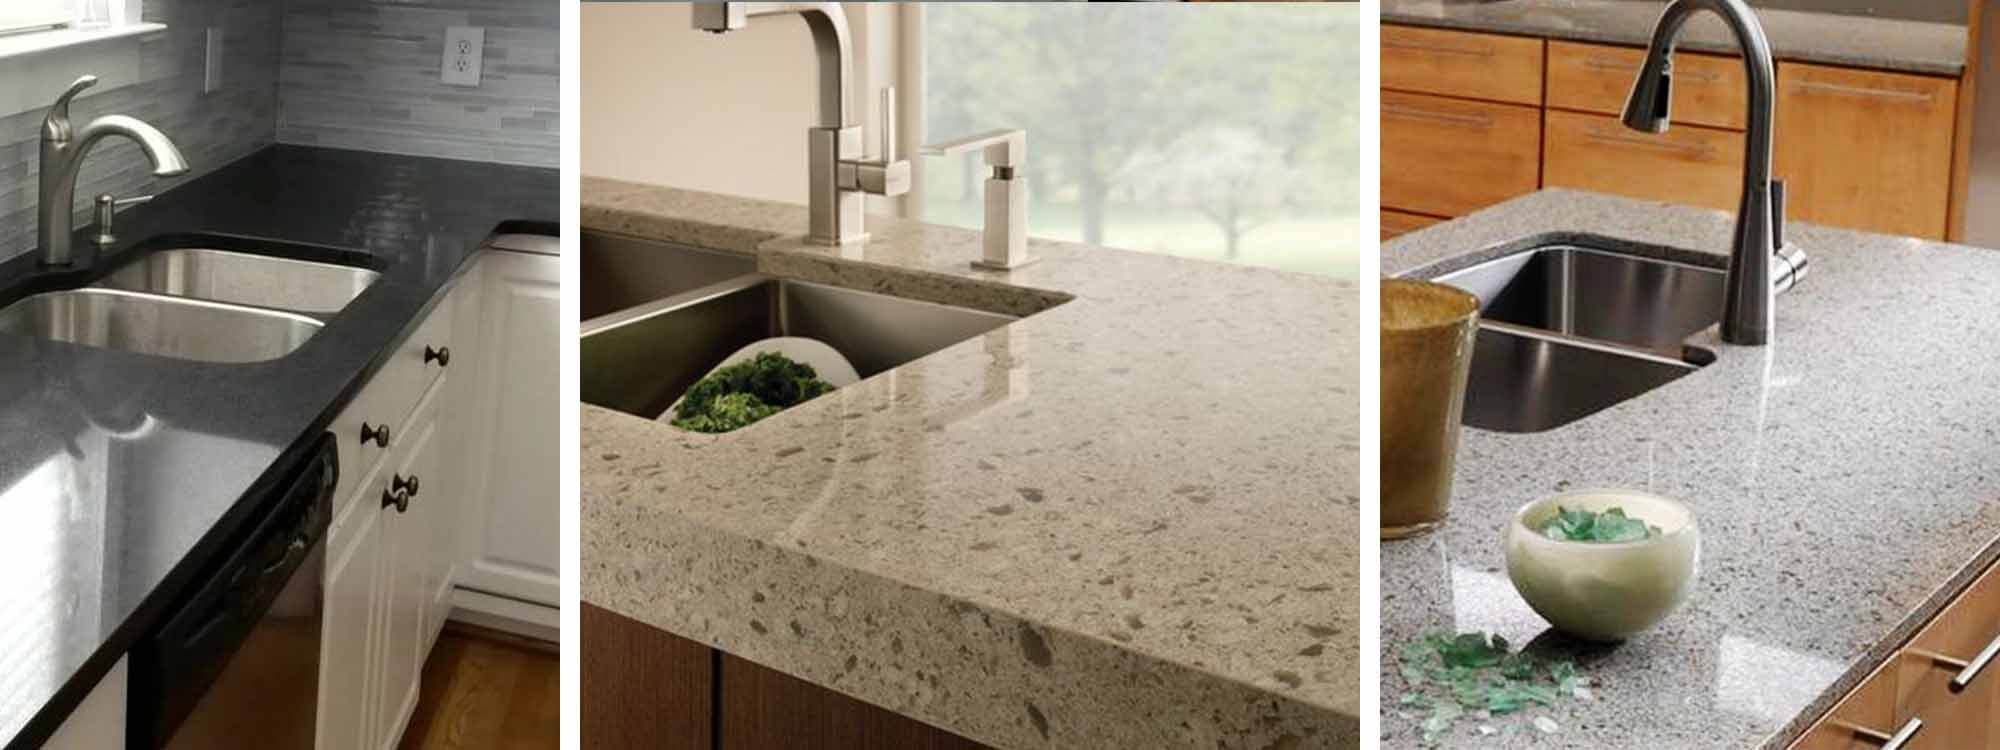 Countertops 9 Types To Consider For Your Kitchen